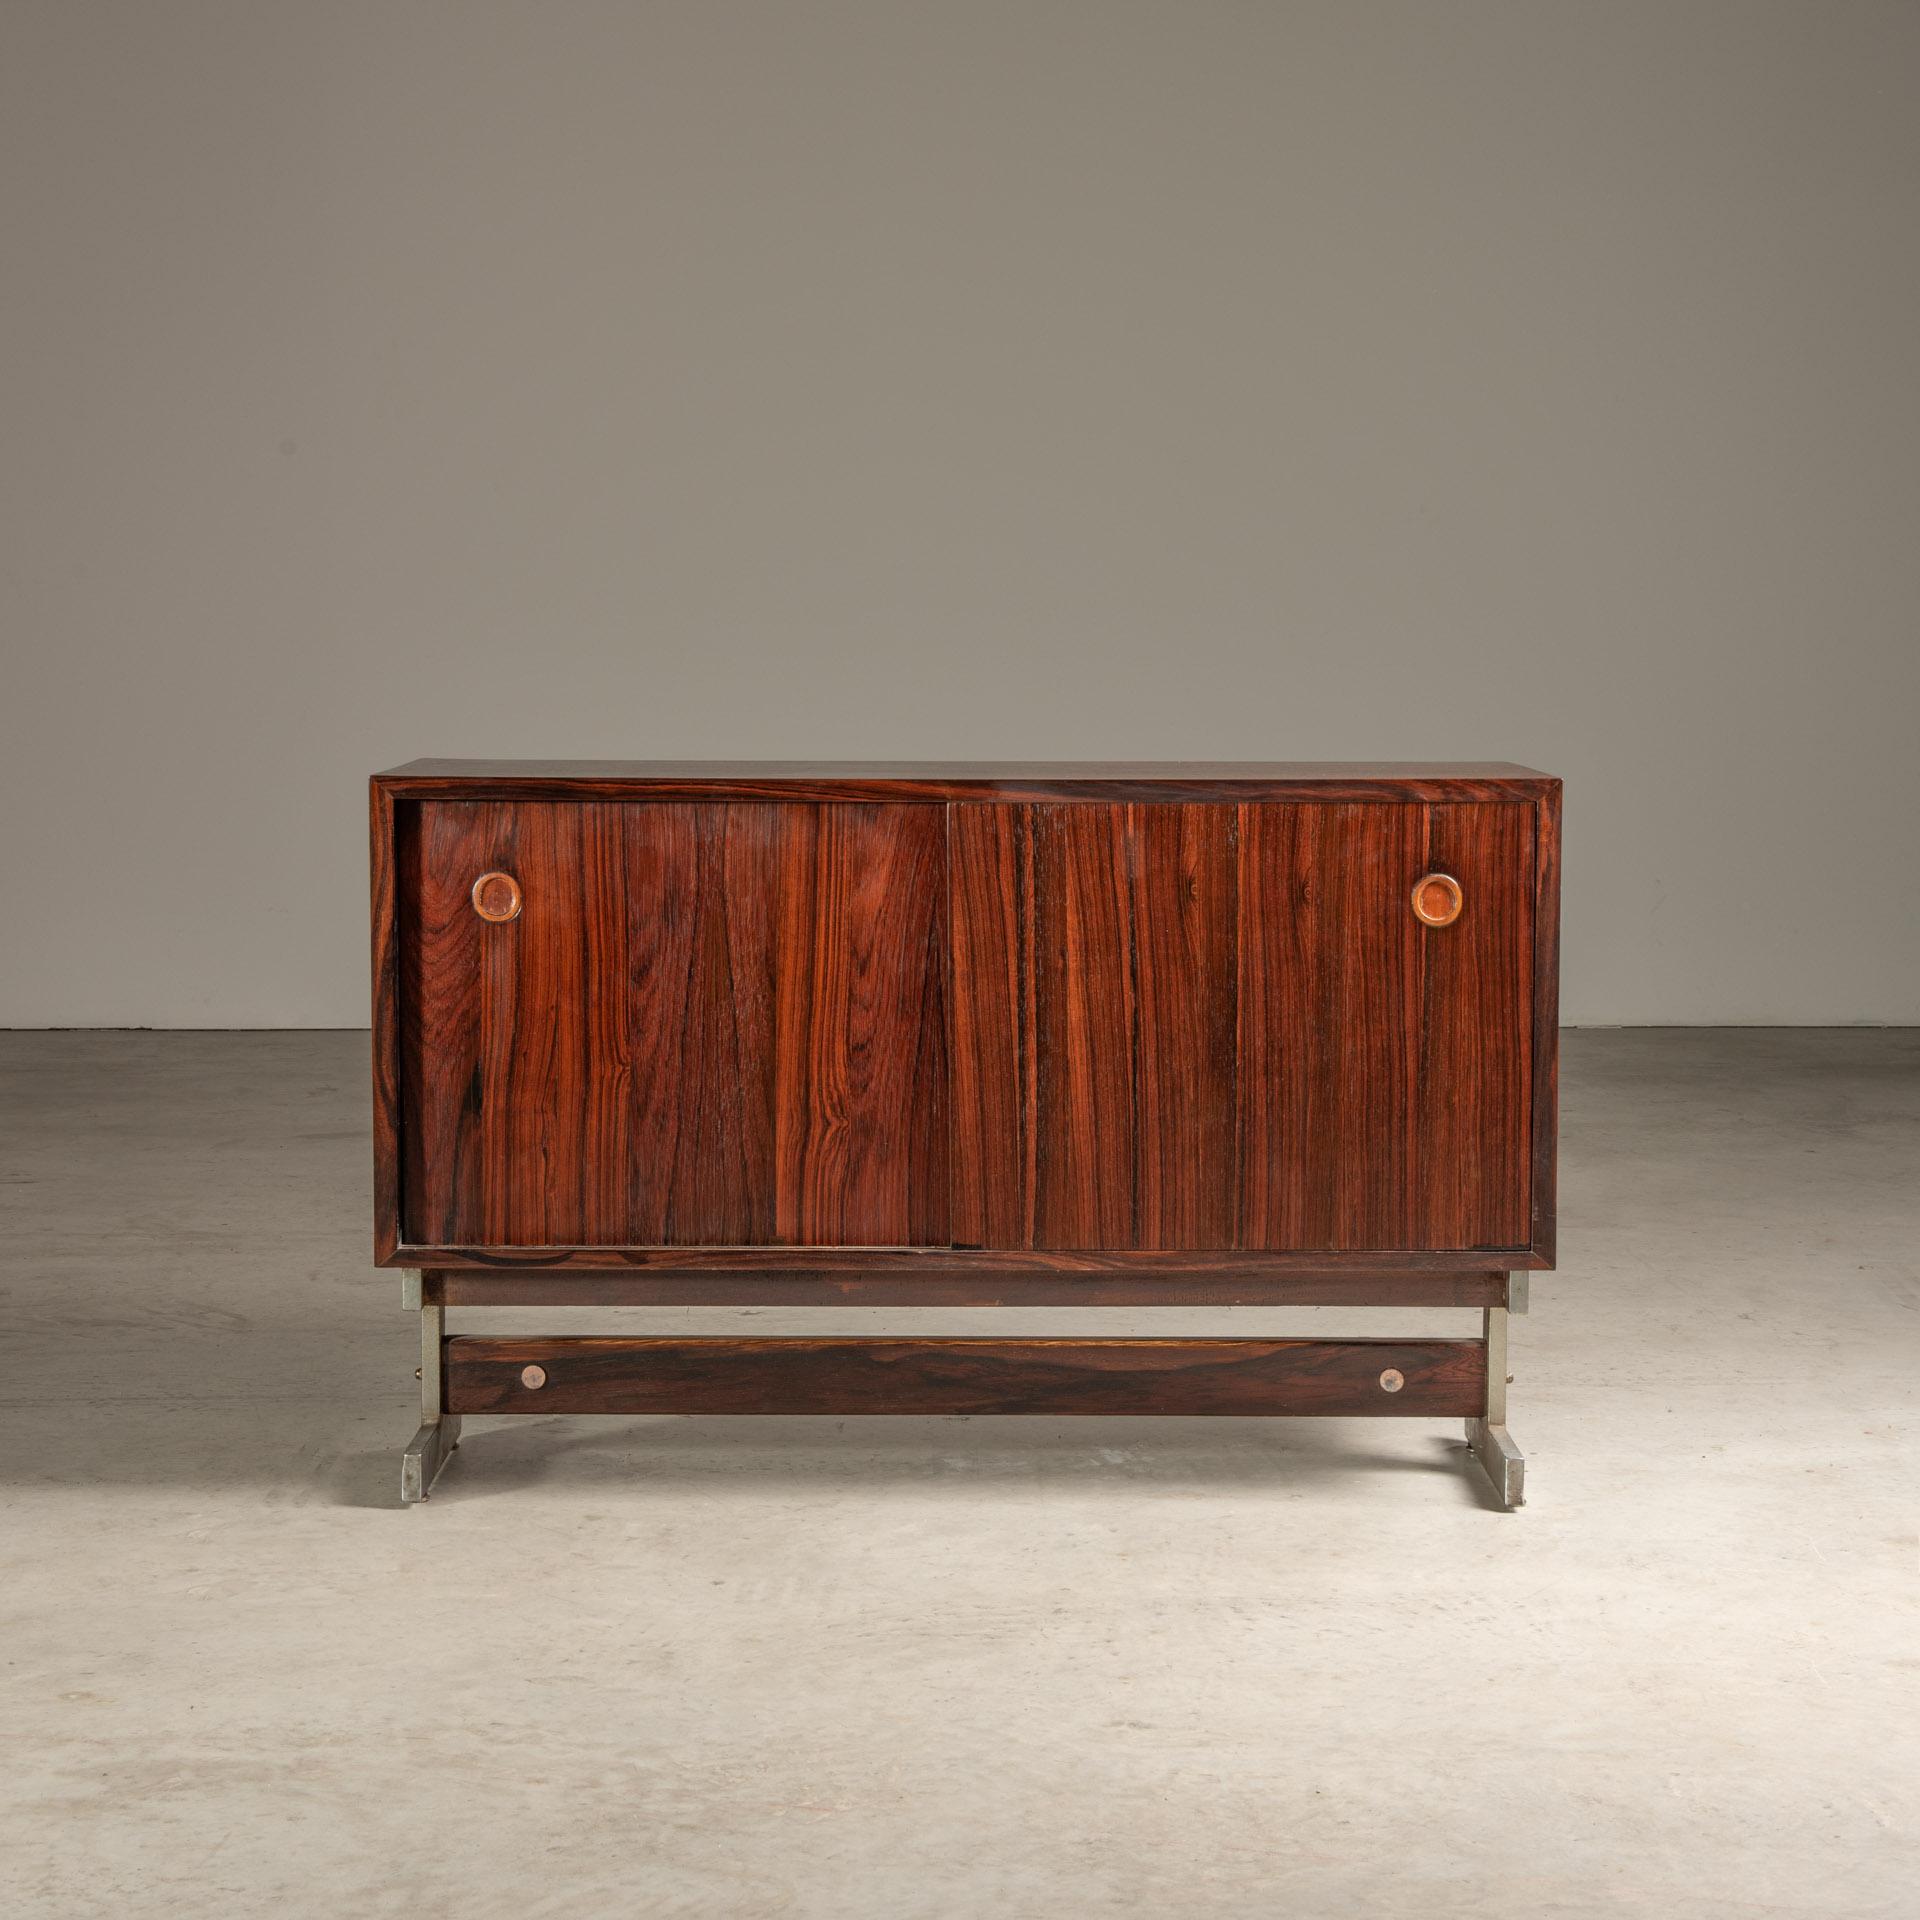 20th Century Small Sideboard in Hardwood, by Sergio Rodrigues, Brazilian Mid-Century Modern For Sale